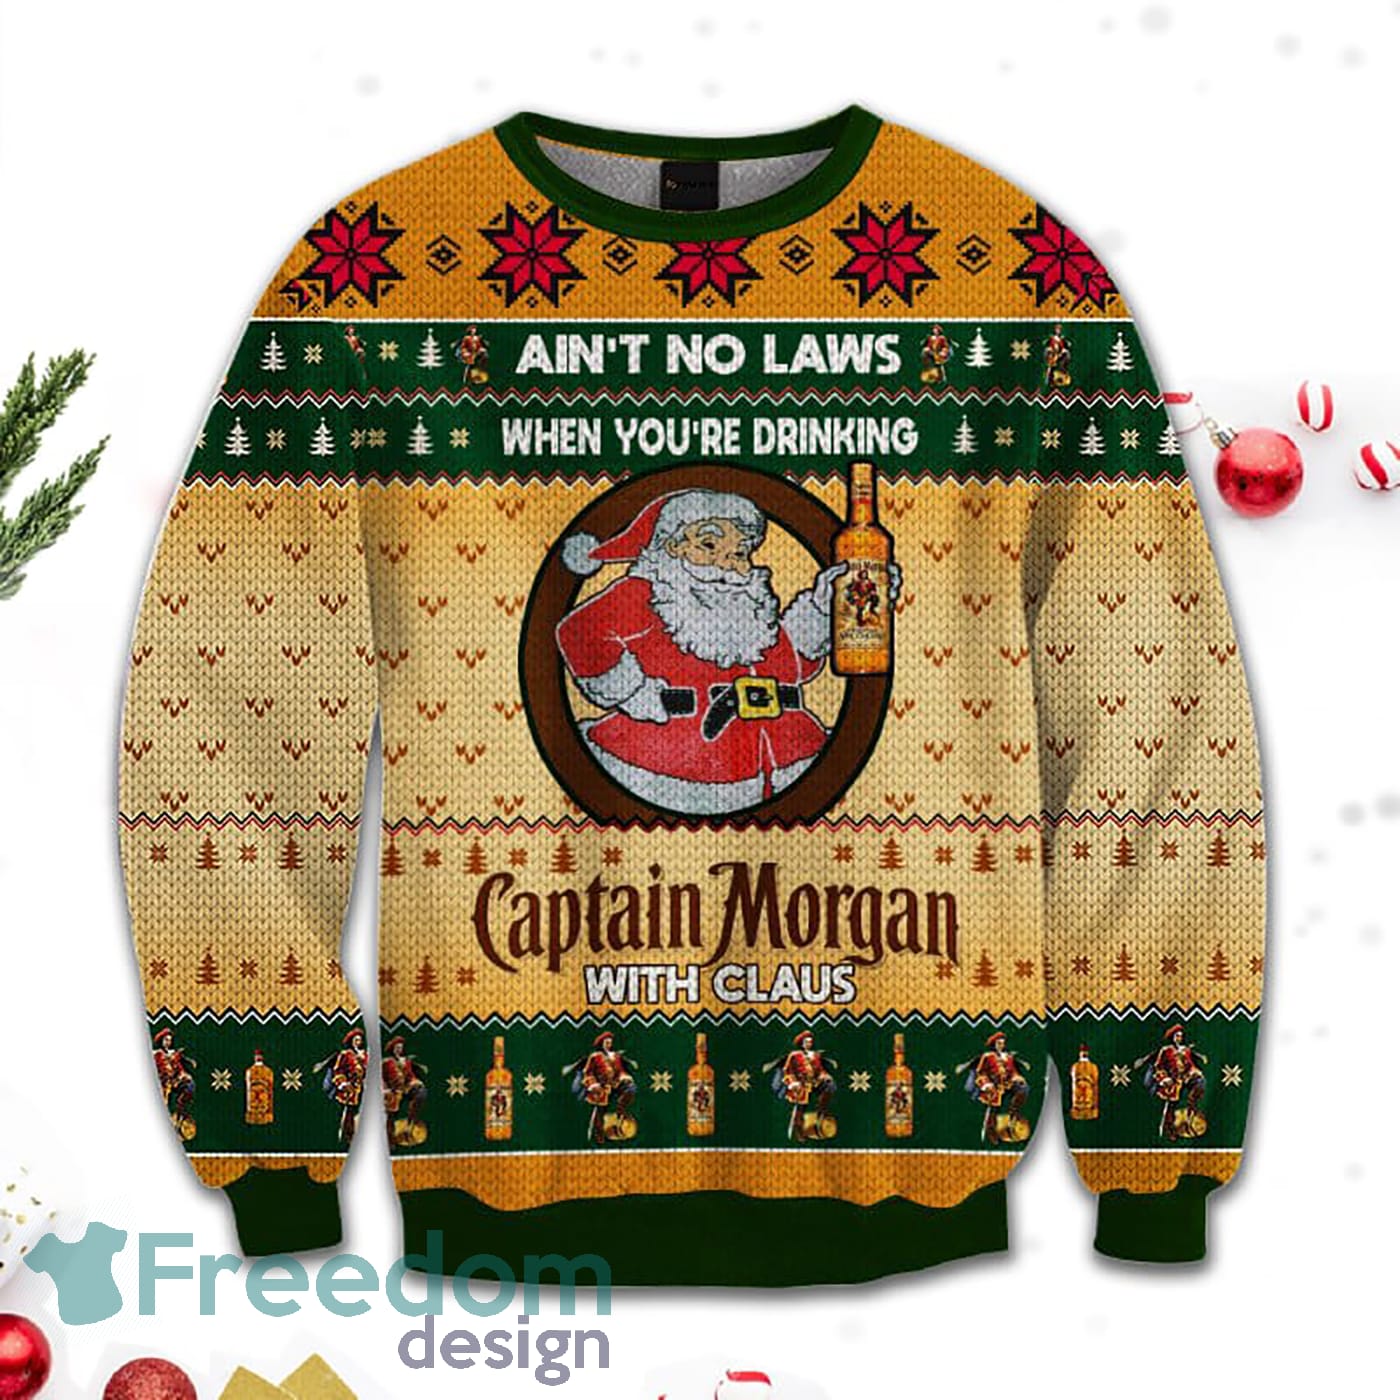 Merr Christmas Ain't No Laws When You Drink Captain Morgan With Claus Sweatshirt